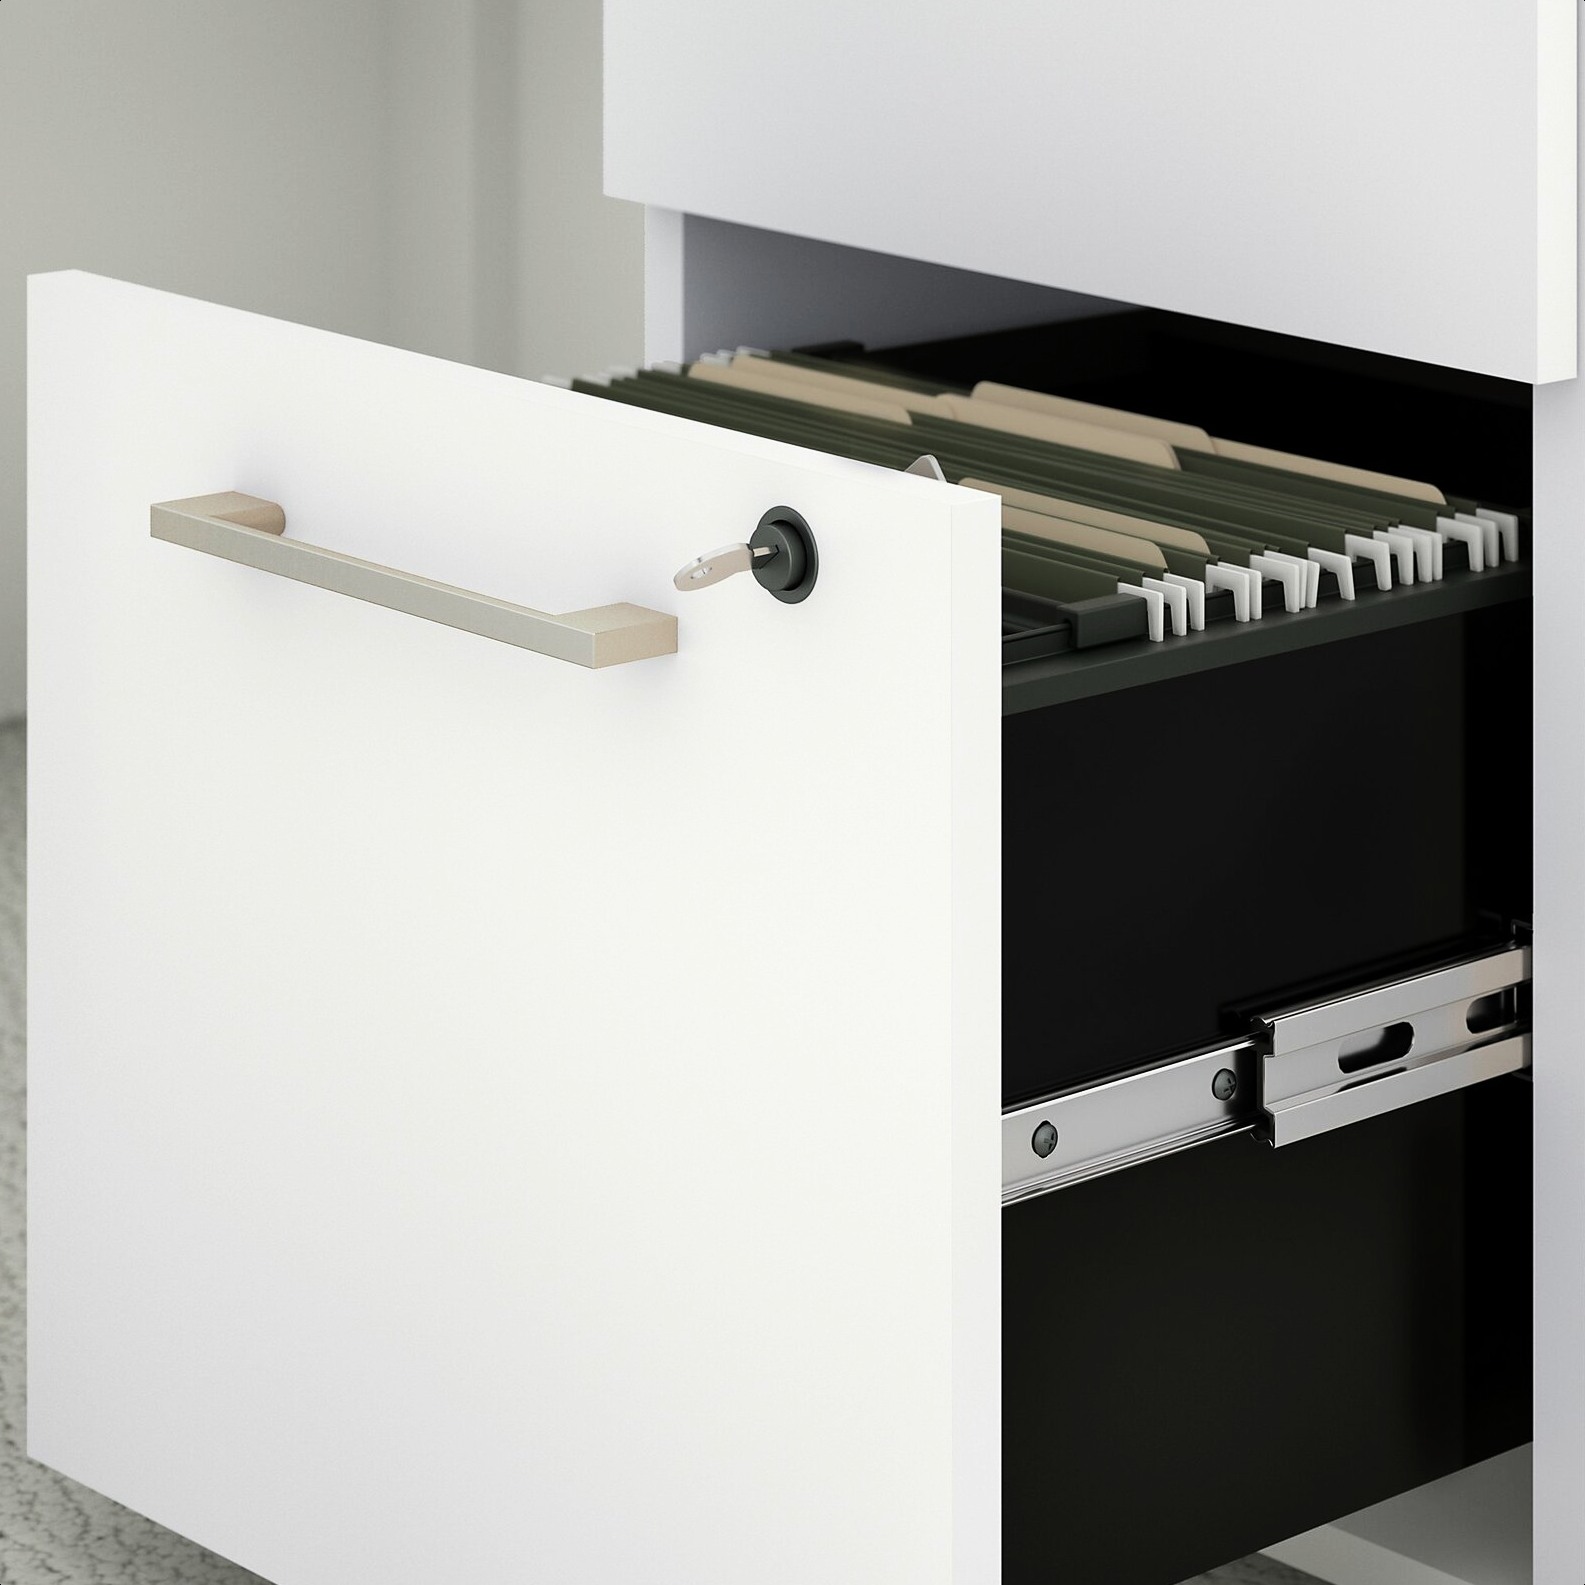 Milanhome 400 Series 3-Drawer Mobile Vertical Filing Cabinet - image 2 of 5